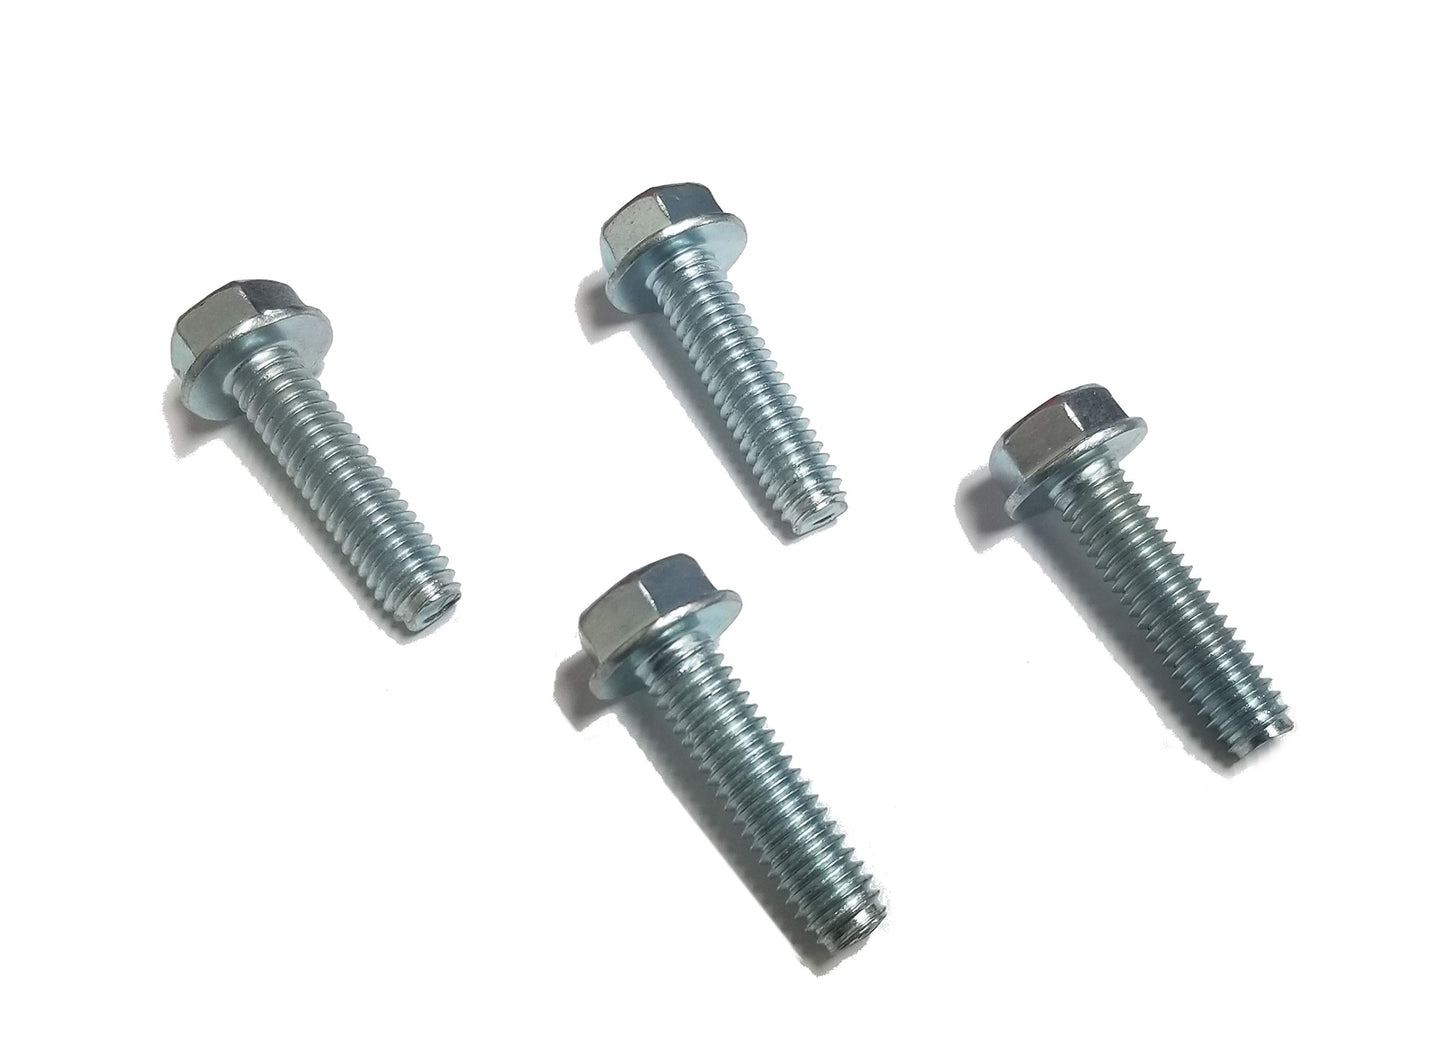 A&I Self-Tapping Mounting Bolt (4 PACK) - B1RS5